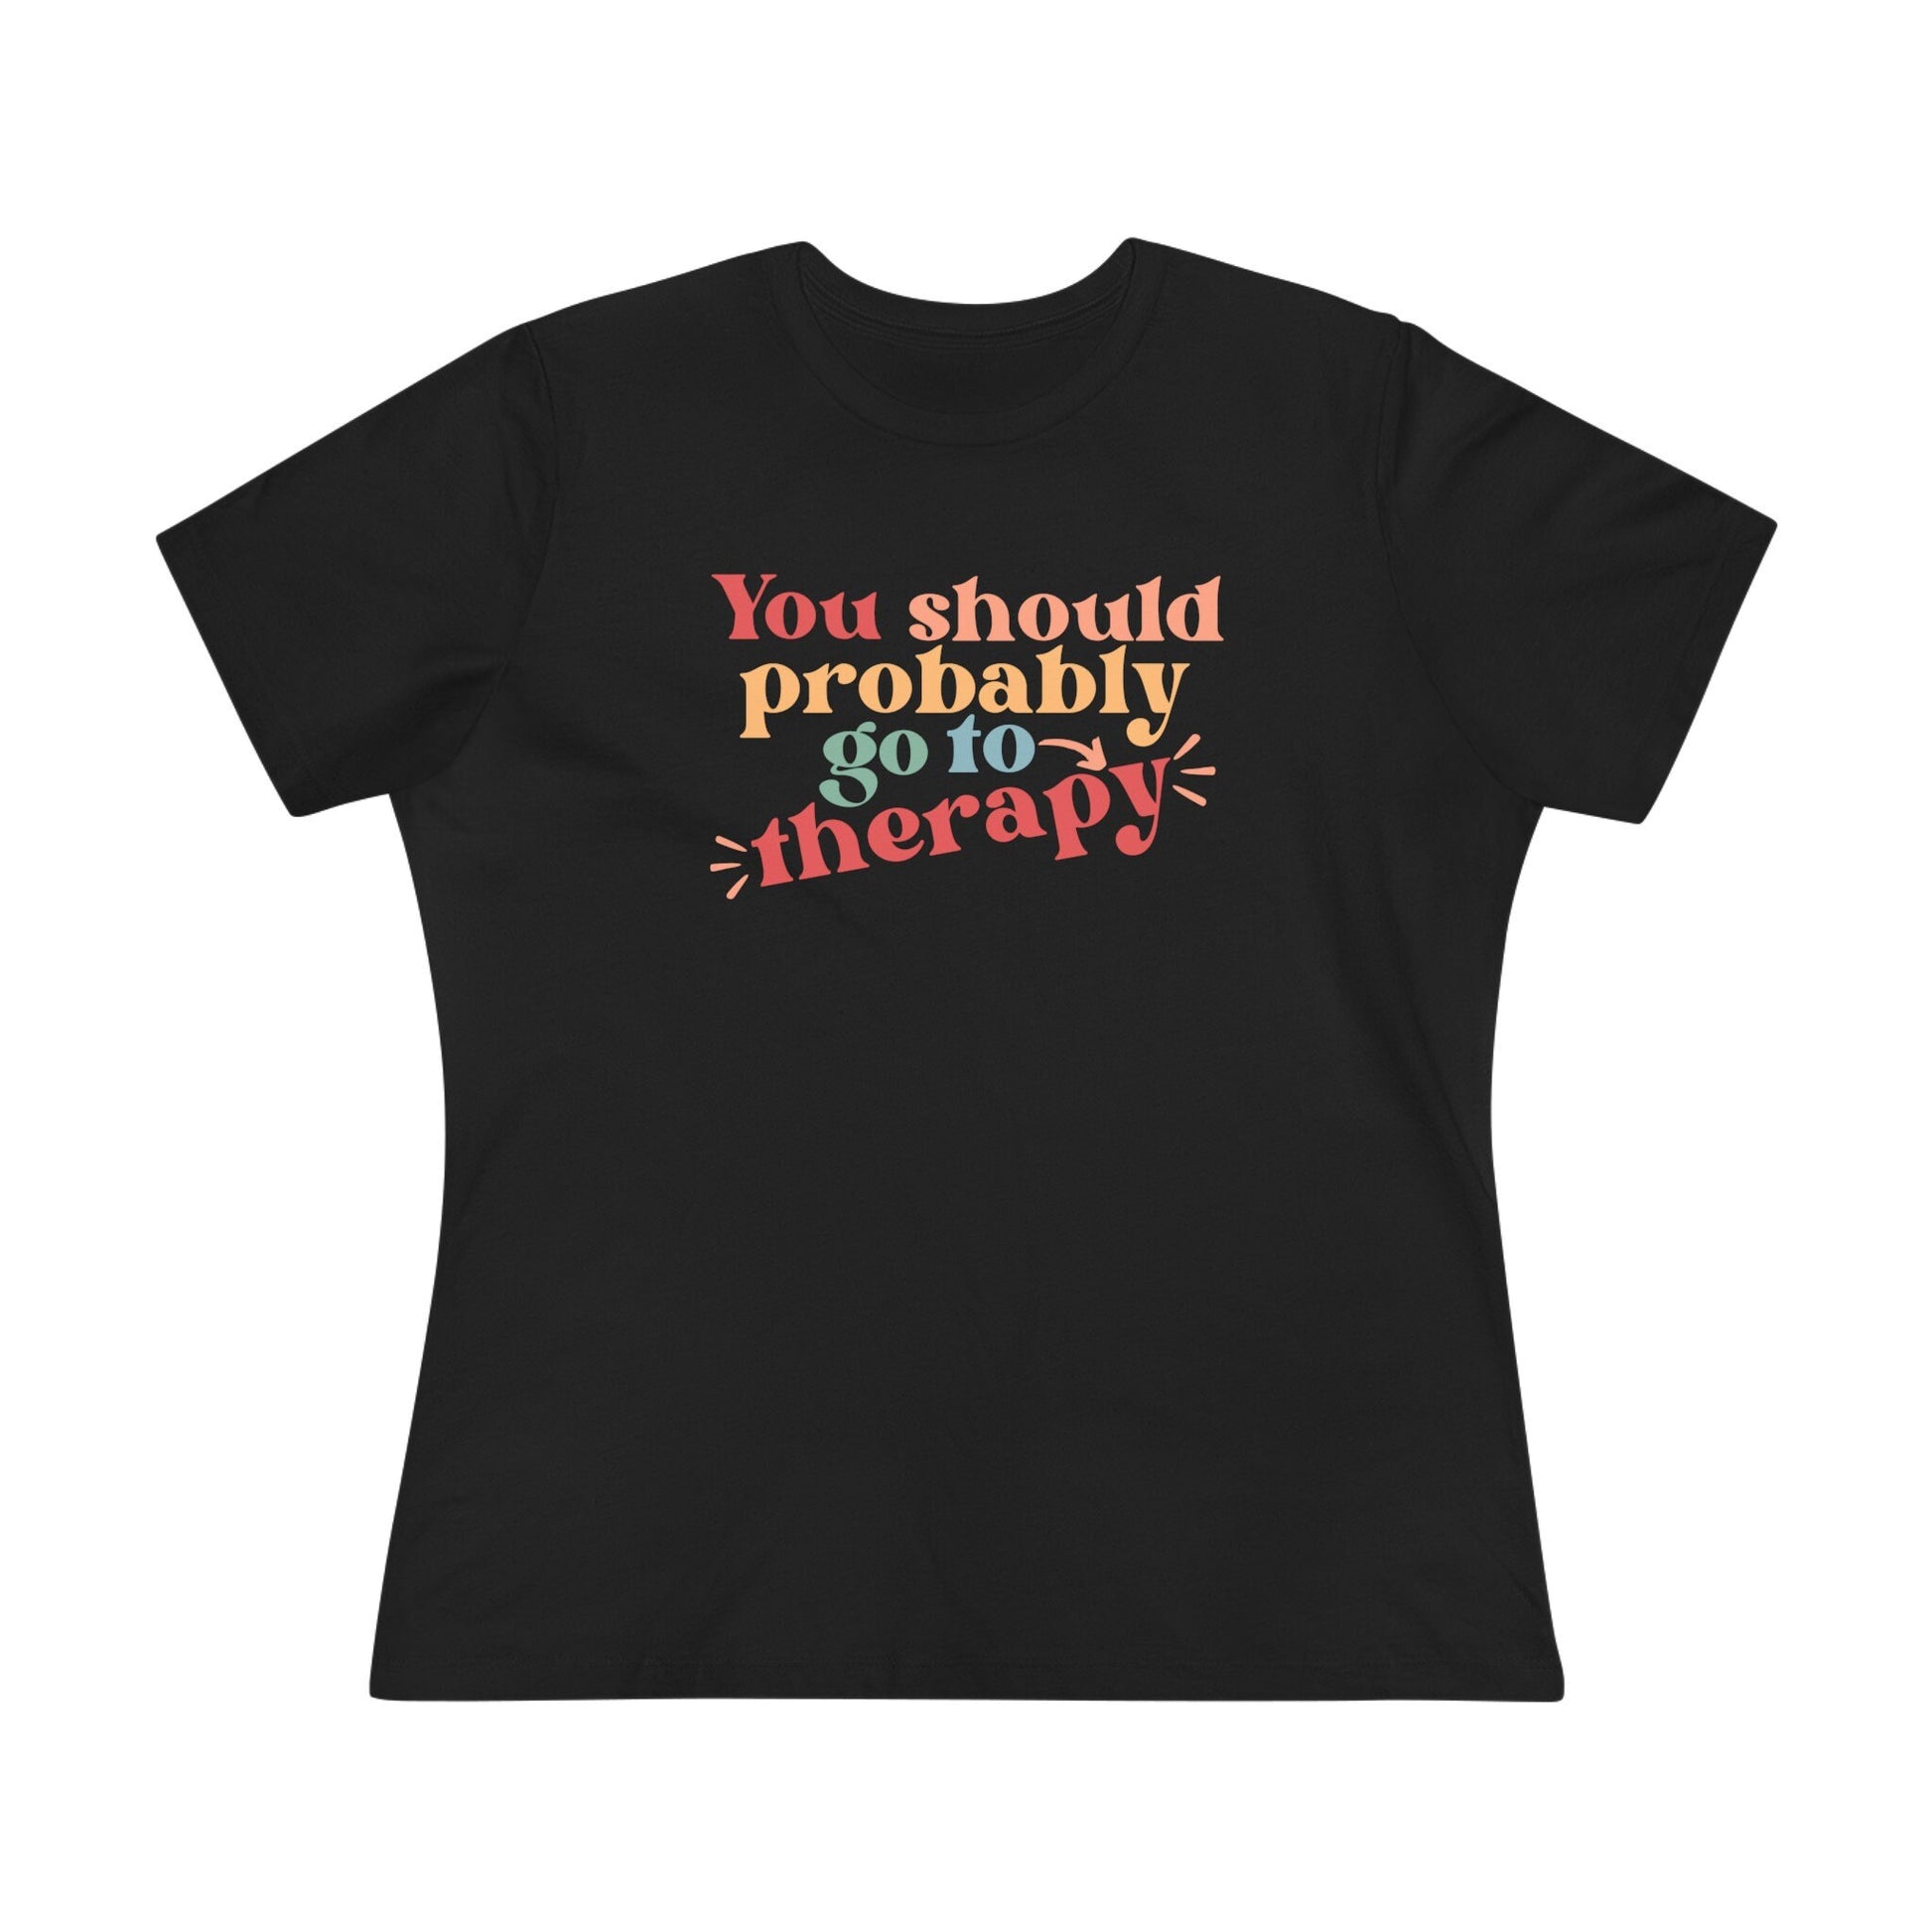 You Should Probably Go To Therapy Womens Tshirt, Mental Health Matters Tee, Counselor Gifts, Psychologist Present, Gen Z Humor